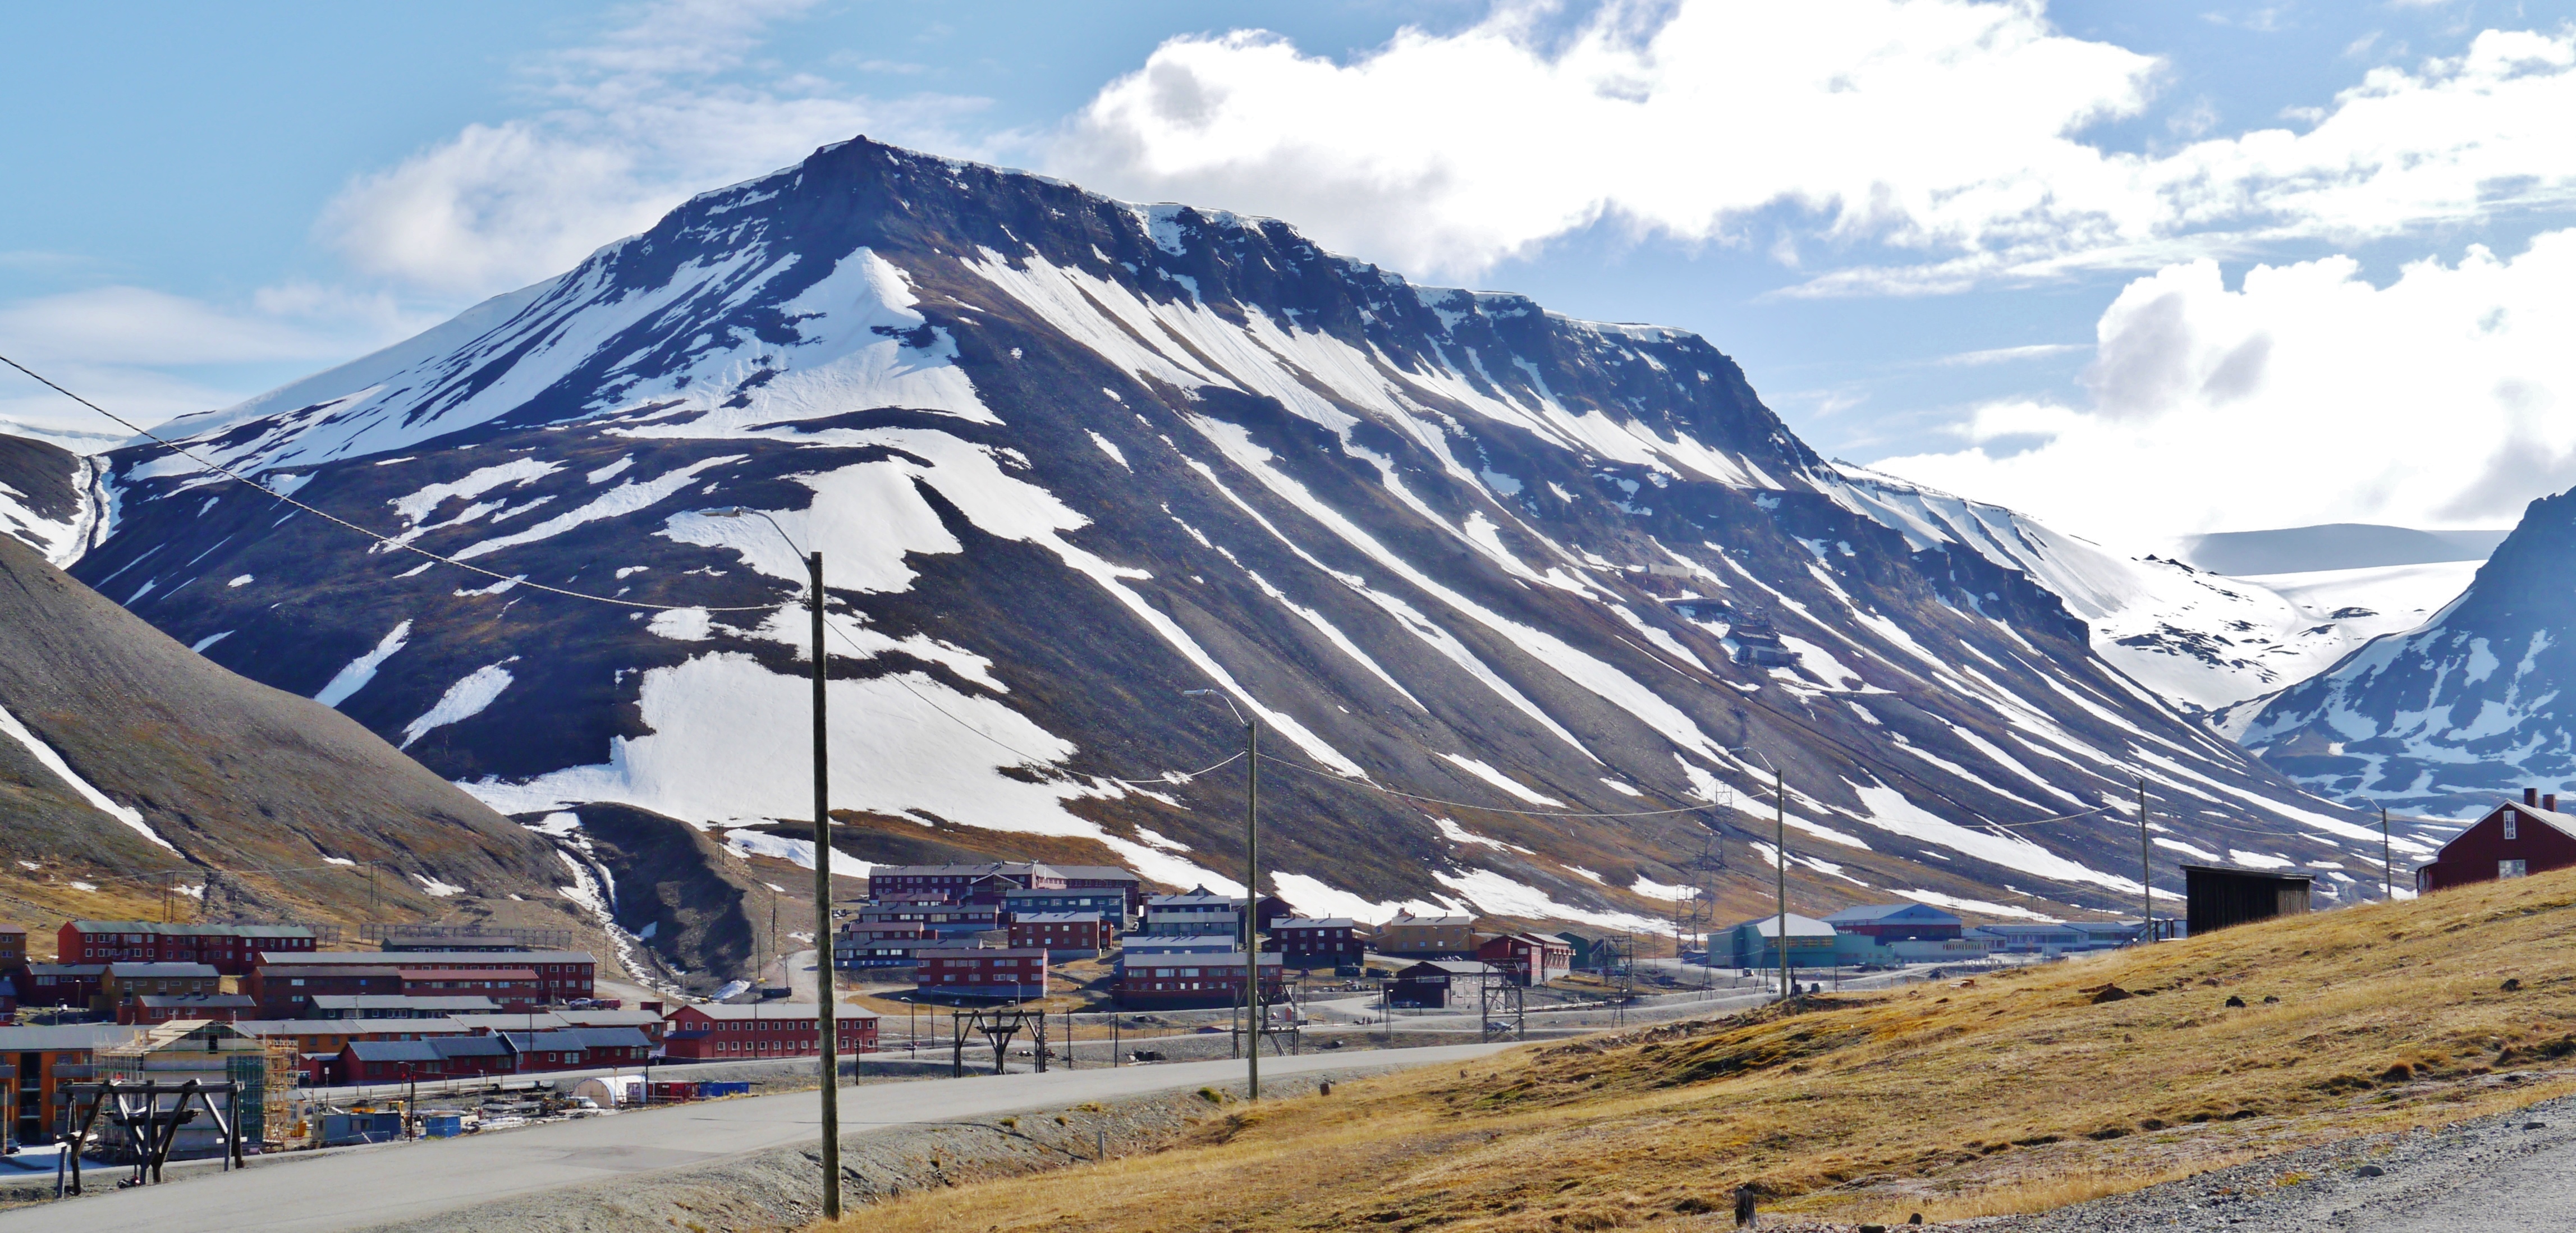 Move To Norway's Chilling Longyearbyen, Without A Visa!